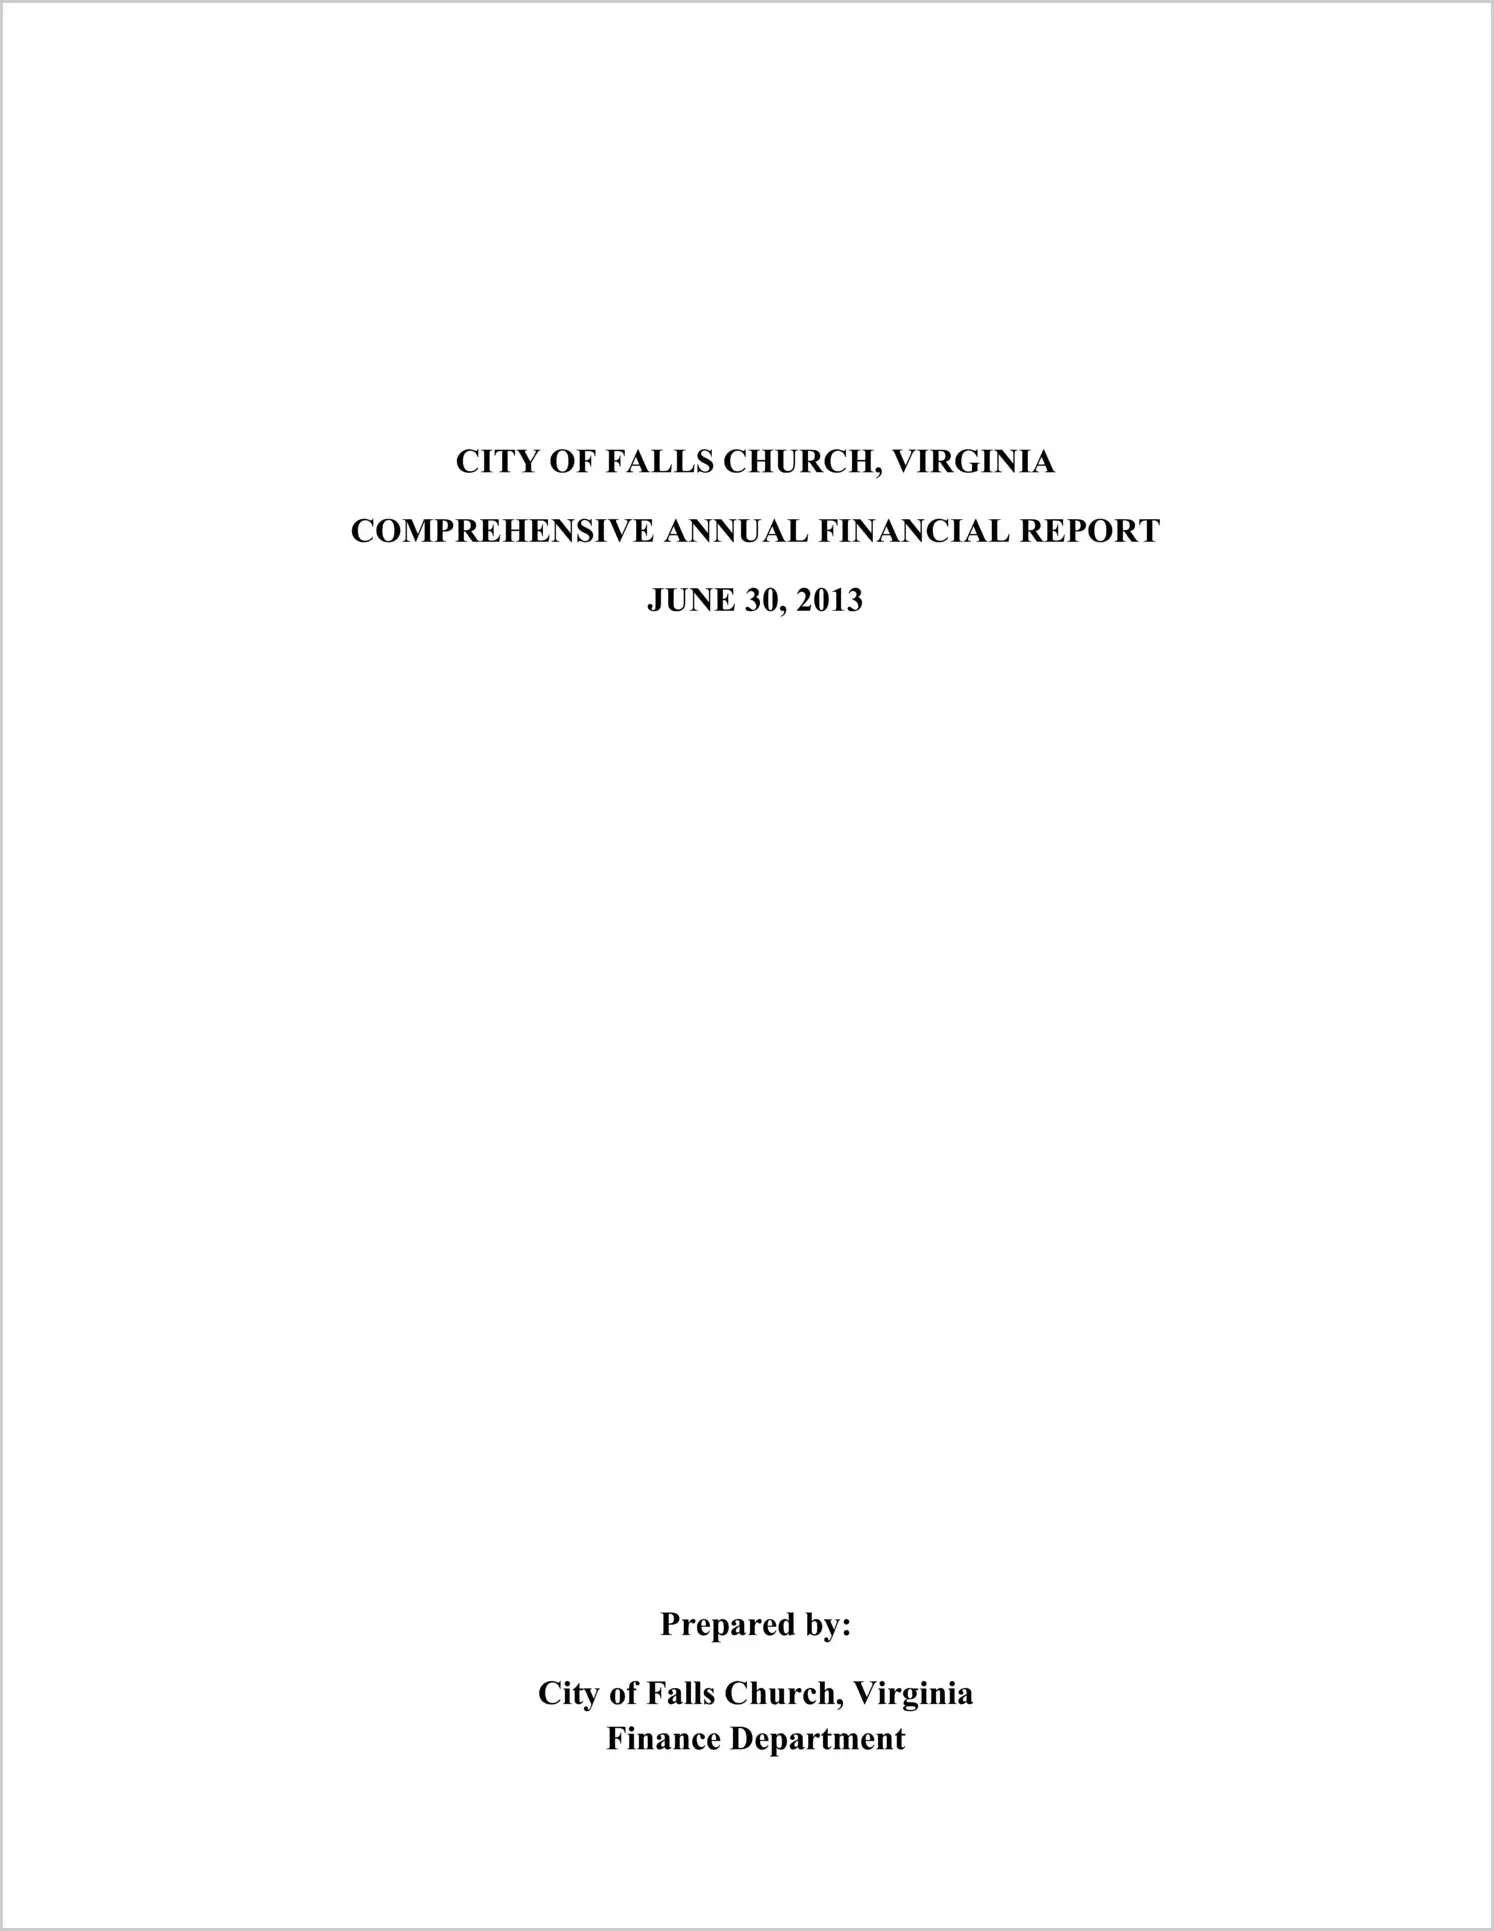 2013 Annual Financial Report for City of Falls Church